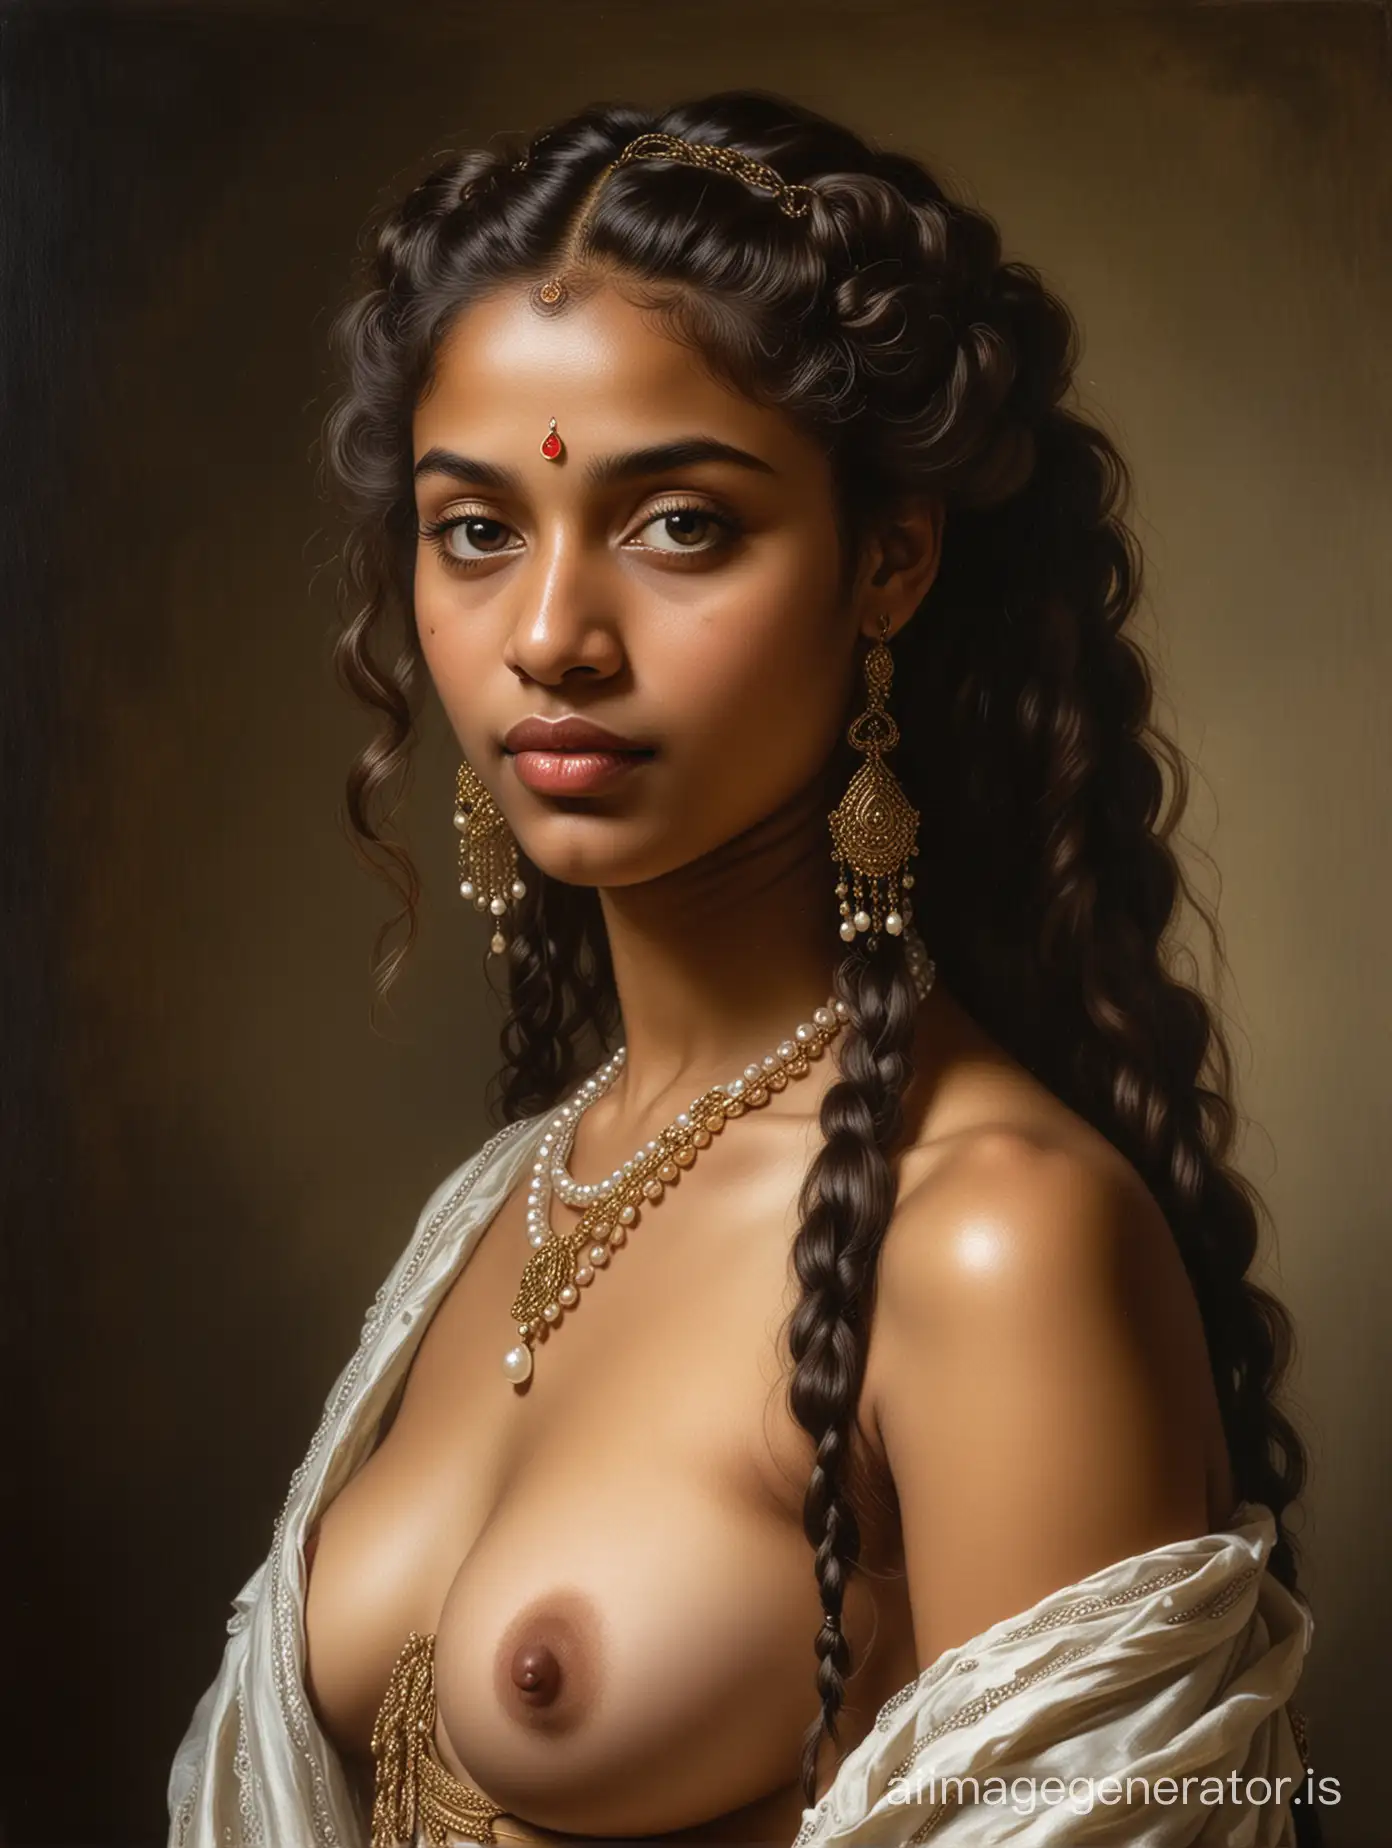 Rembrandt front view oil painting of an extraordinarily beautiful nude Tamil princess with long flowing braided hair wearing pearls